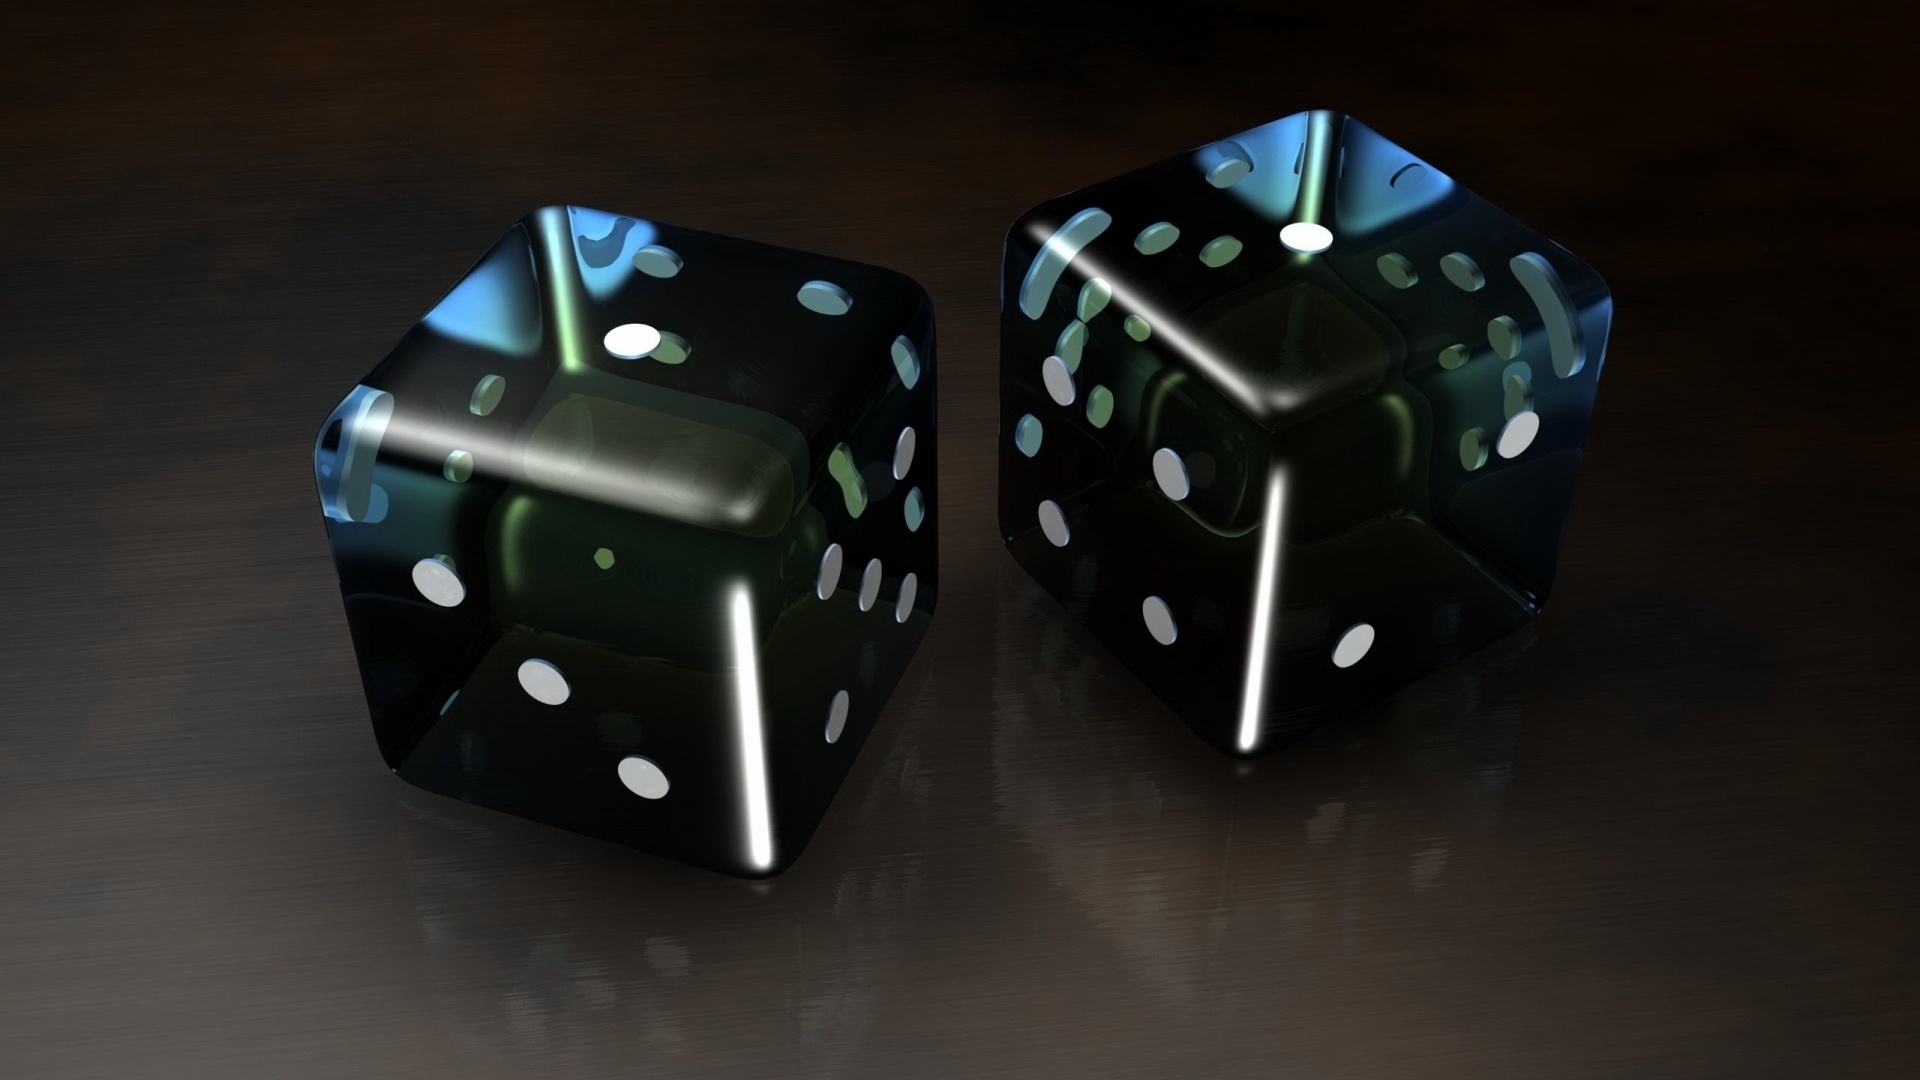 dice wallpaper,games,dice game,dice,indoor games and sports,green